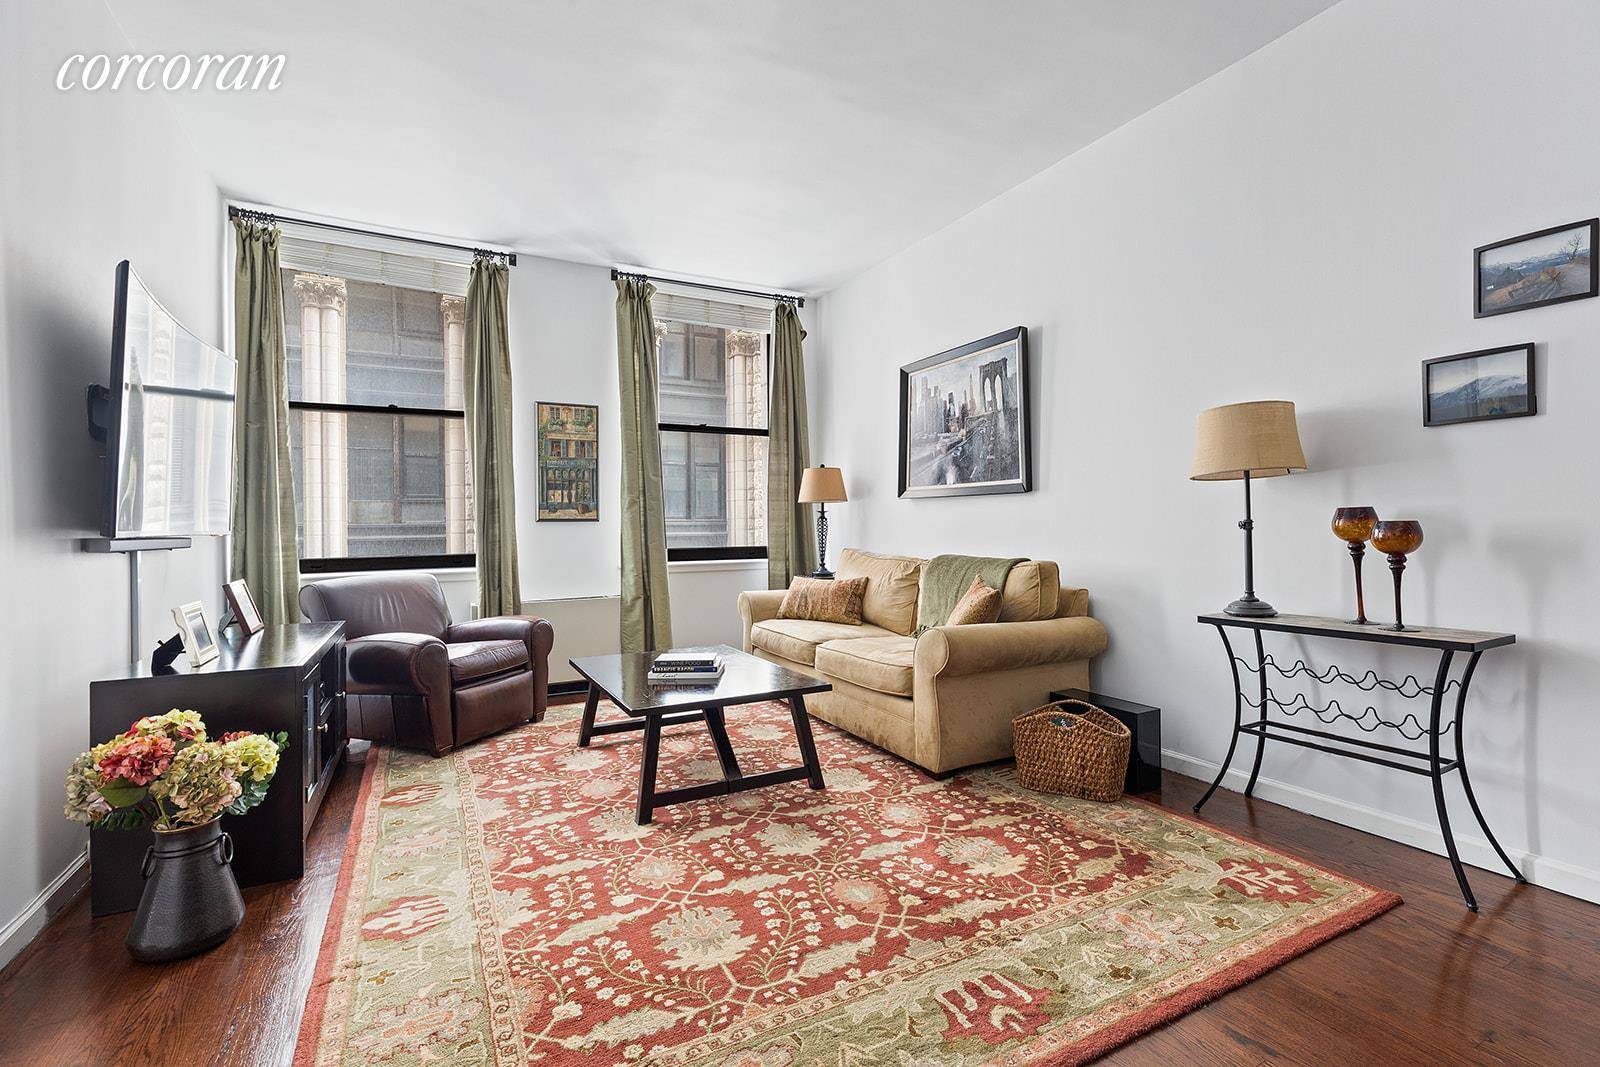 Welcome to 150 Nassau Street 8B, a quiet and loft like one bedroom condo located at the crossroads of City Hall Park, TriBeCa and FiDi.